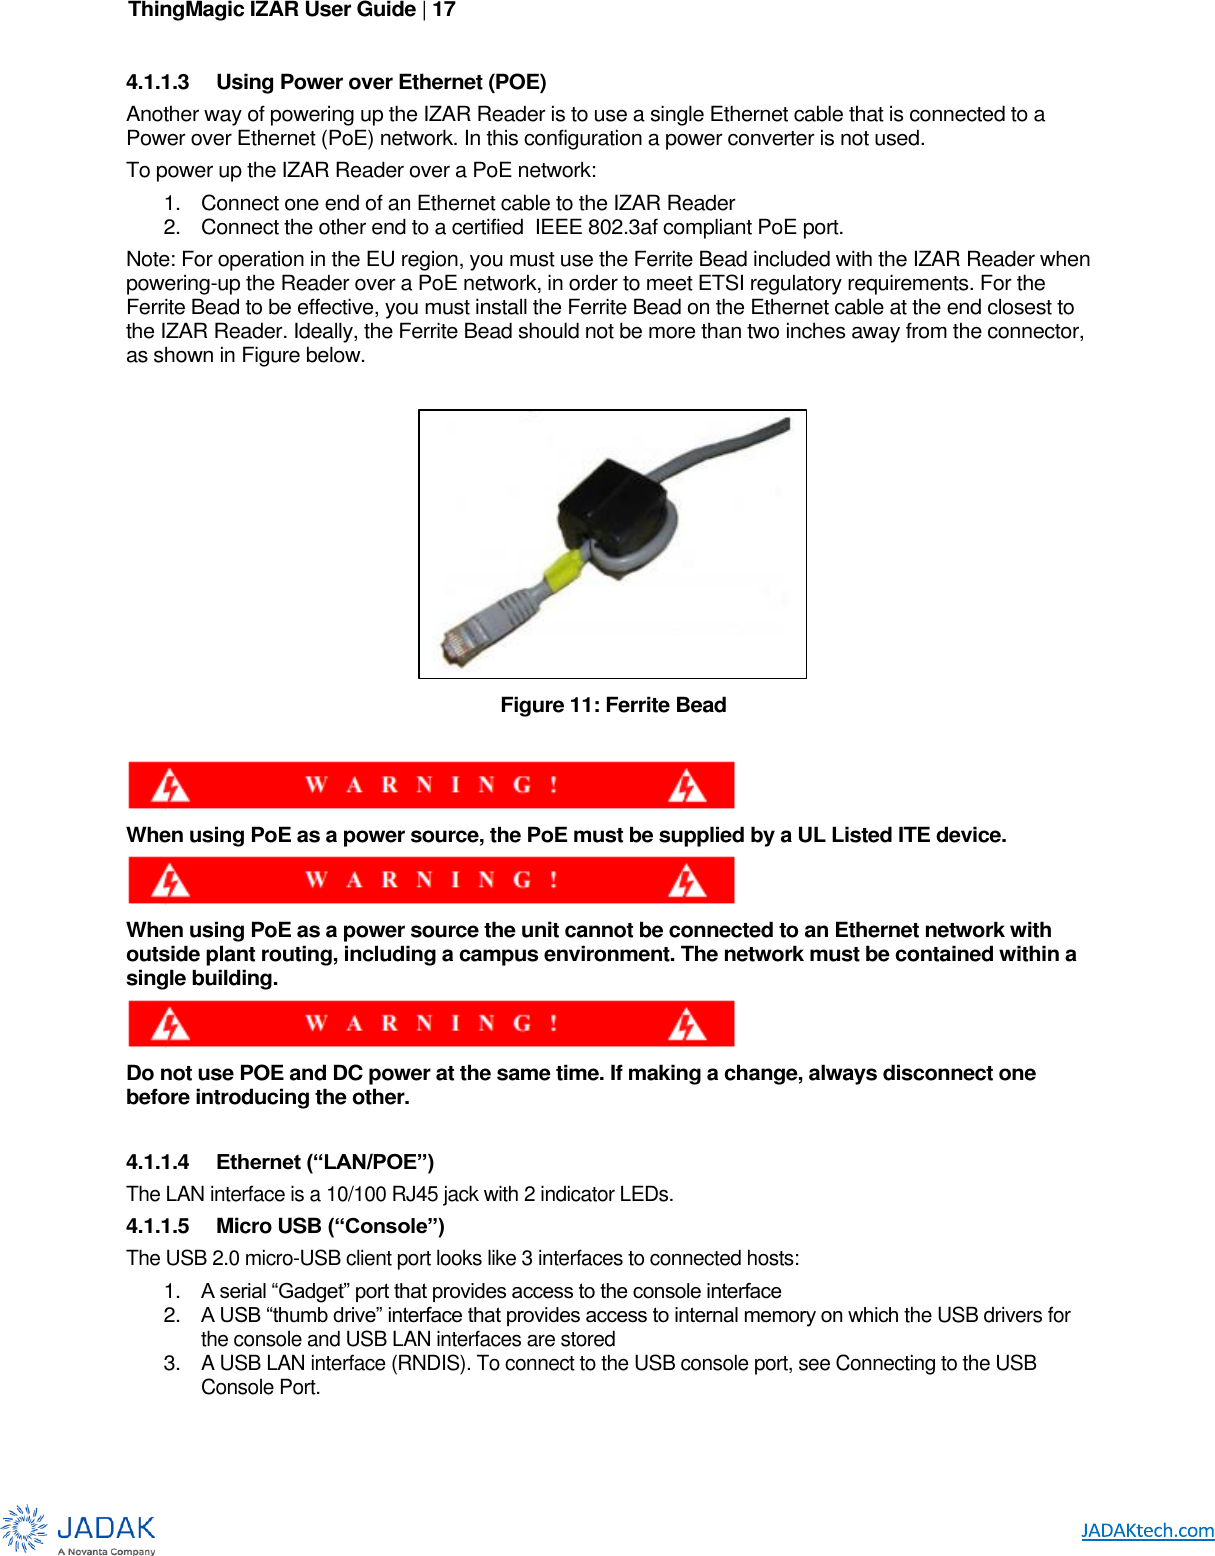 ThingMagic IZAR User Guide | 17      4.1.1.3  Using Power over Ethernet (POE) Another way of powering up the IZAR Reader is to use a single Ethernet cable that is connected to a Power over Ethernet (PoE) network. In this configuration a power converter is not used.  To power up the IZAR Reader over a PoE network:  1.  Connect one end of an Ethernet cable to the IZAR Reader  2.  Connect the other end to a certified  IEEE 802.3af compliant PoE port.  Note: For operation in the EU region, you must use the Ferrite Bead included with the IZAR Reader when powering-up the Reader over a PoE network, in order to meet ETSI regulatory requirements. For the Ferrite Bead to be effective, you must install the Ferrite Bead on the Ethernet cable at the end closest to the IZAR Reader. Ideally, the Ferrite Bead should not be more than two inches away from the connector, as shown in Figure below.   Figure 11: Ferrite Bead   When using PoE as a power source, the PoE must be supplied by a UL Listed ITE device.   When using PoE as a power source the unit cannot be connected to an Ethernet network with outside plant routing, including a campus environment. The network must be contained within a single building.  Do not use POE and DC power at the same time. If making a change, always disconnect one before introducing the other.   4.1.1.4  Ethernet (“LAN/POE”) The LAN interface is a 10/100 RJ45 jack with 2 indicator LEDs. 4.1.1.5  Micro USB (“Console”) The USB 2.0 micro-USB client port looks like 3 interfaces to connected hosts: 1. A serial “Gadget” port that provides access to the console interface 2. A USB “thumb drive” interface that provides access to internal memory on which the USB drivers for the console and USB LAN interfaces are stored 3. A USB LAN interface (RNDIS). To connect to the USB console port, see Connecting to the USB Console Port. 